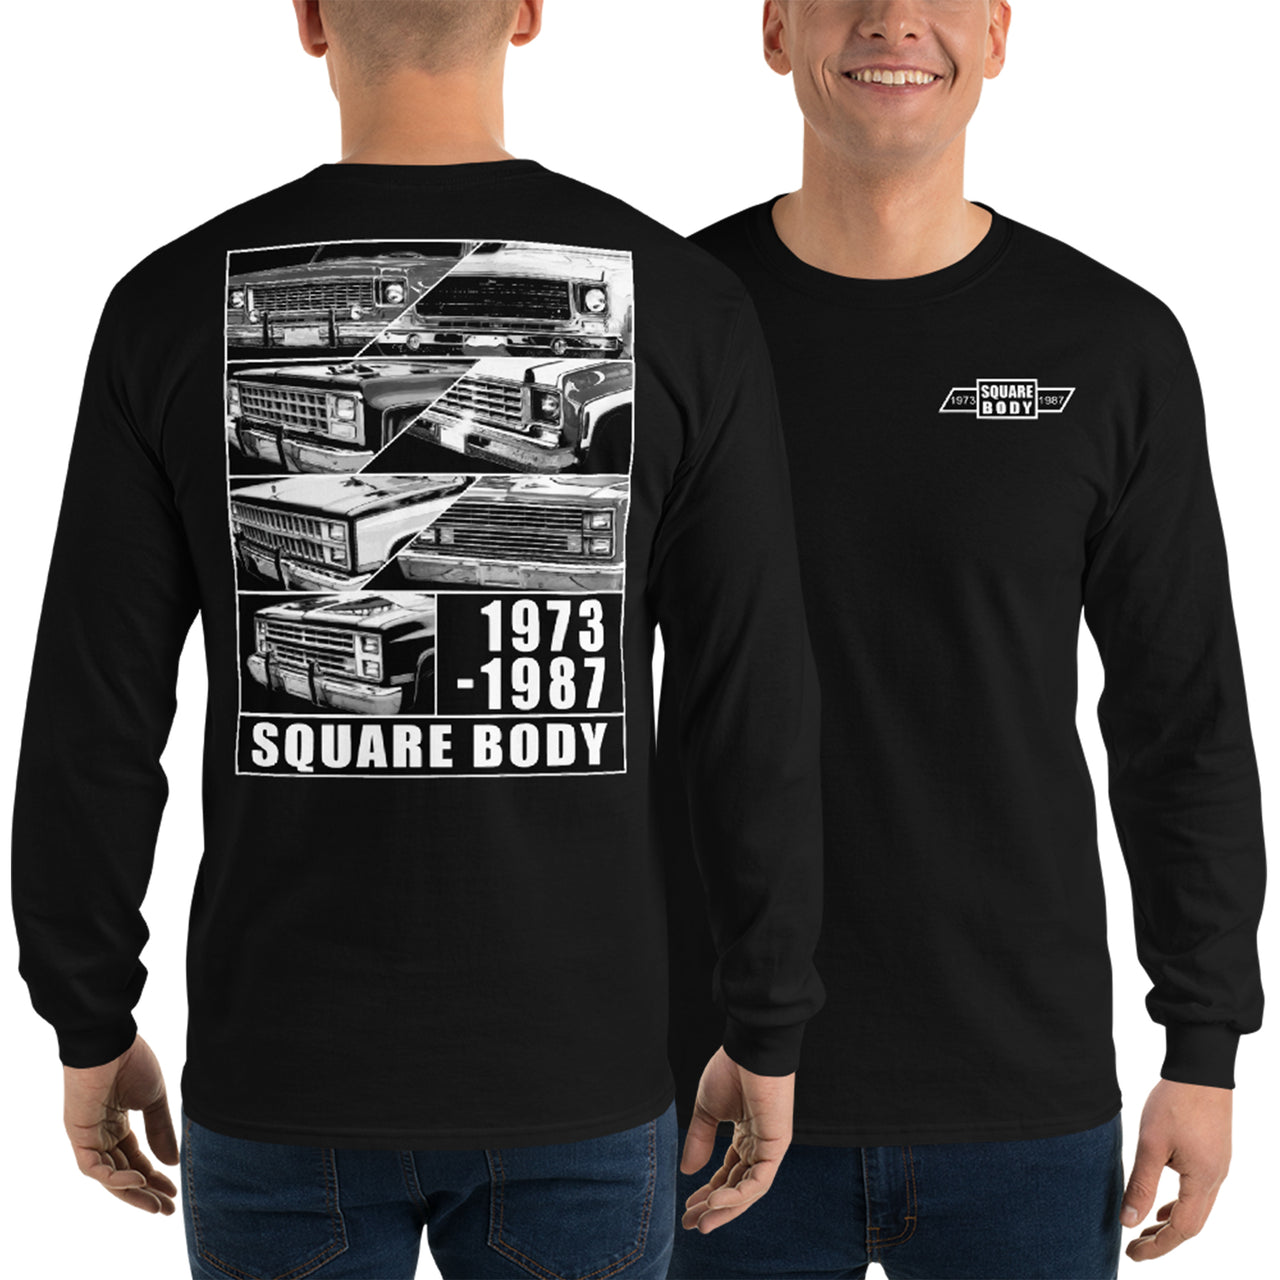 Square Body 1973-1987 Long Sleeve T-Shirt modeled in black